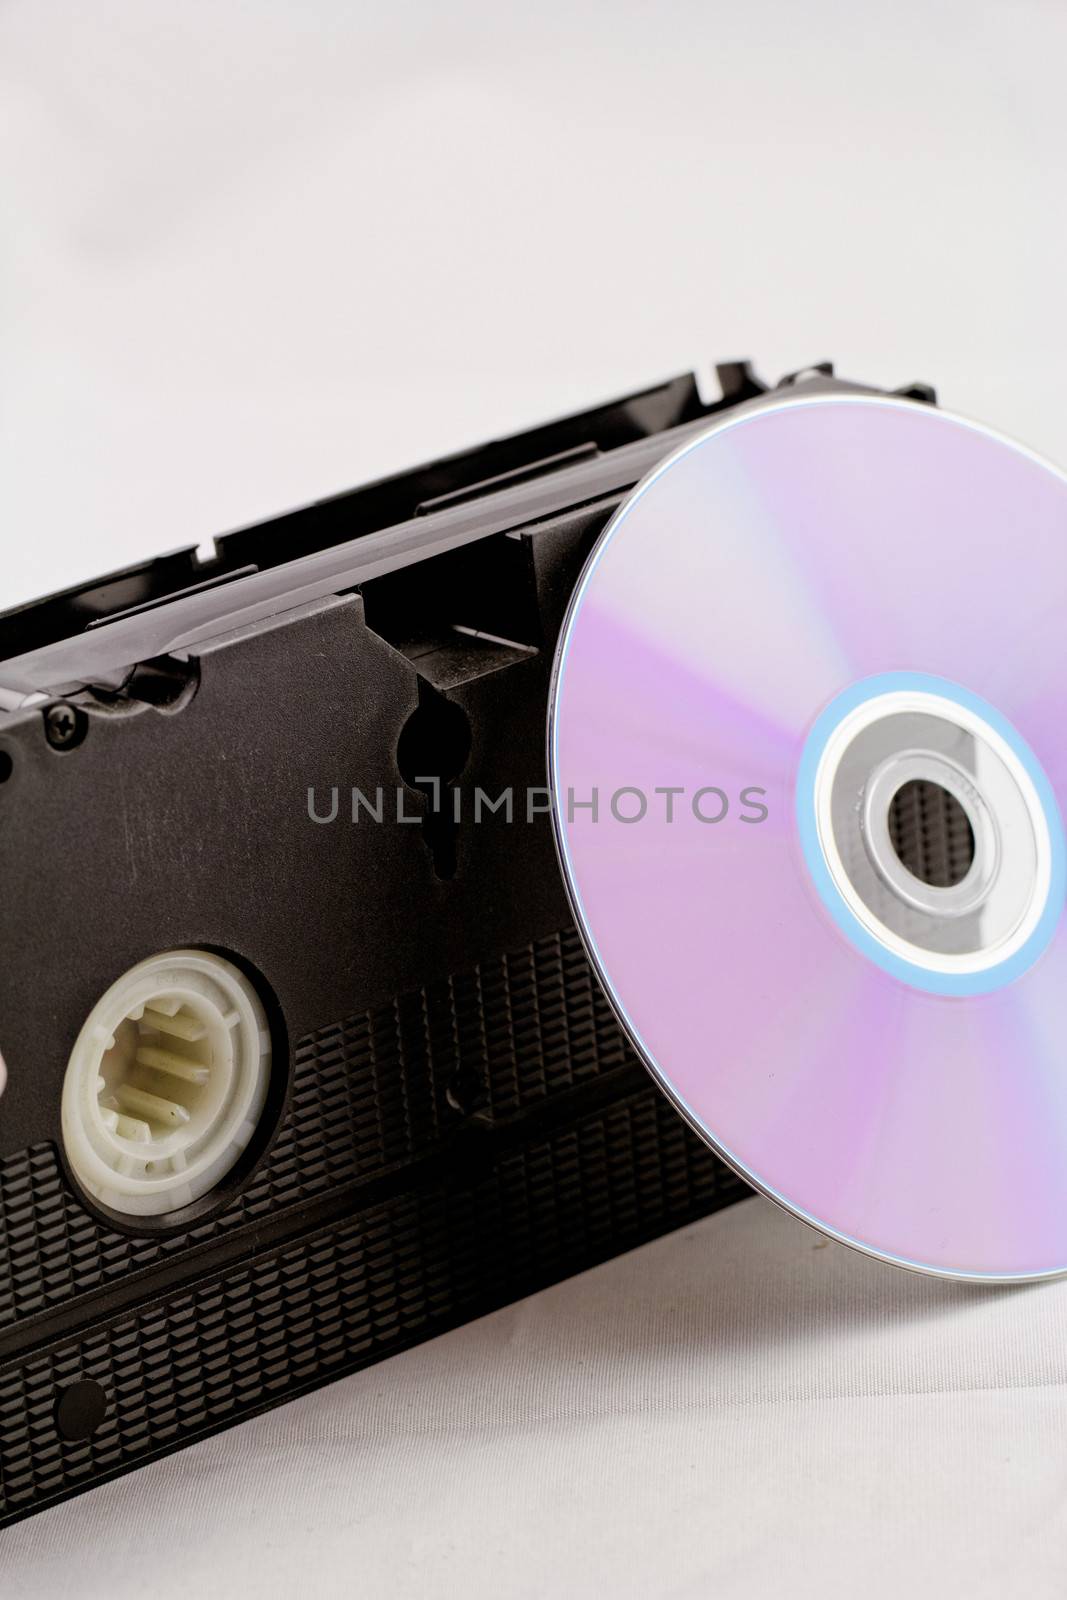 VHS video tape and DVD disk (analog digital) on white background